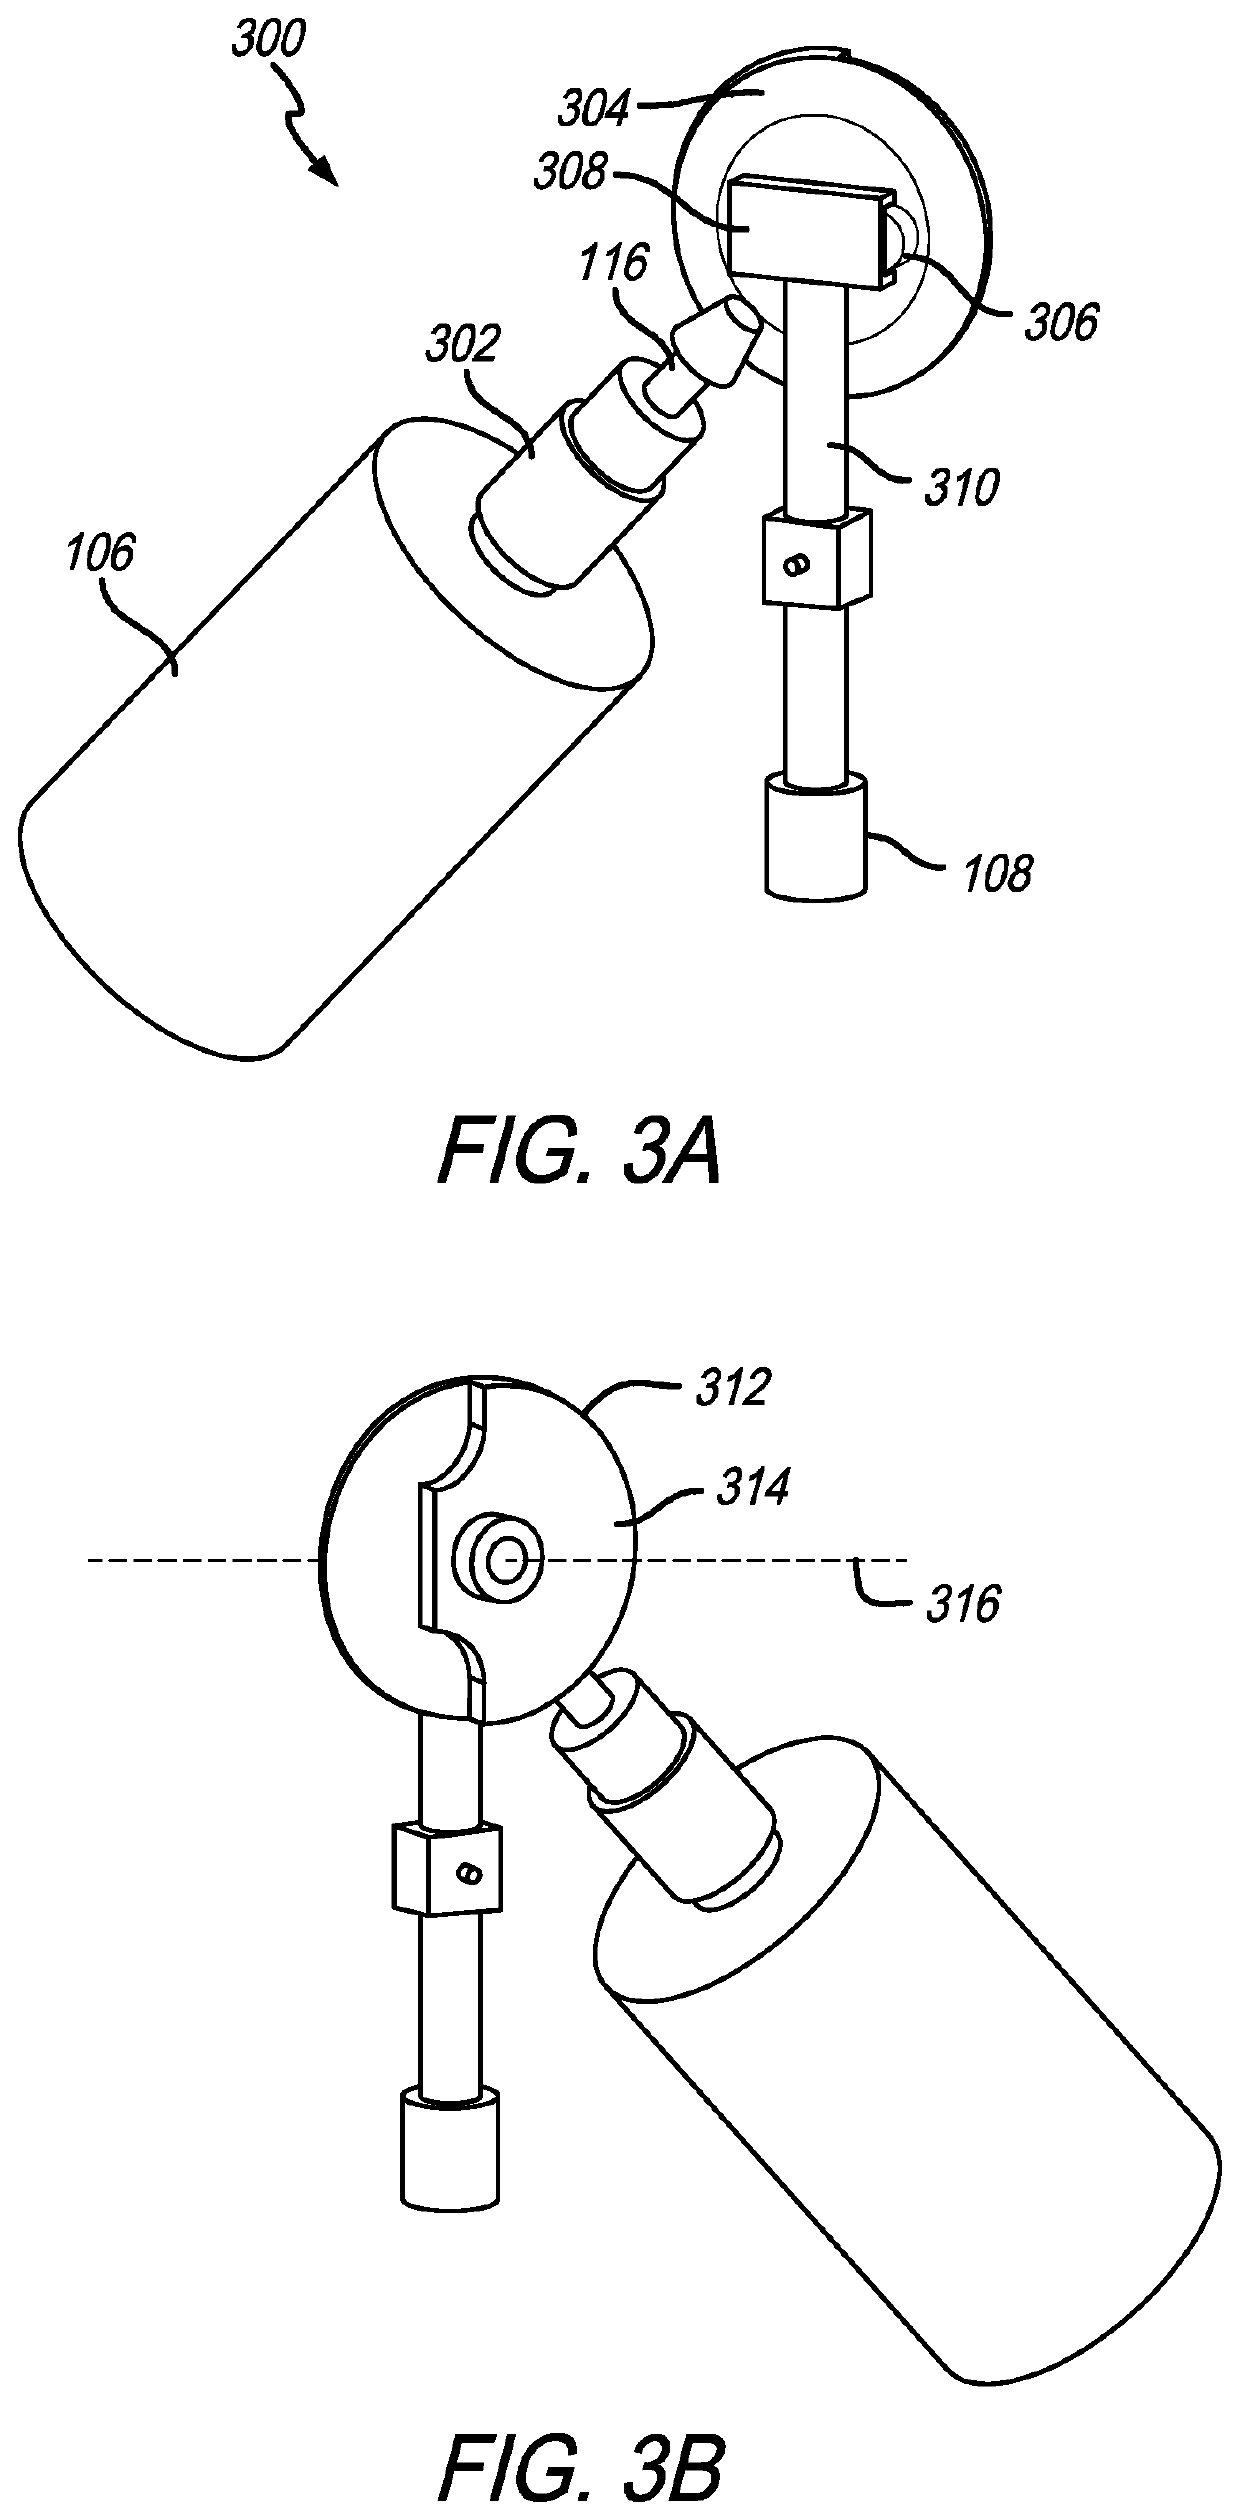 Percussive massage device and method of use